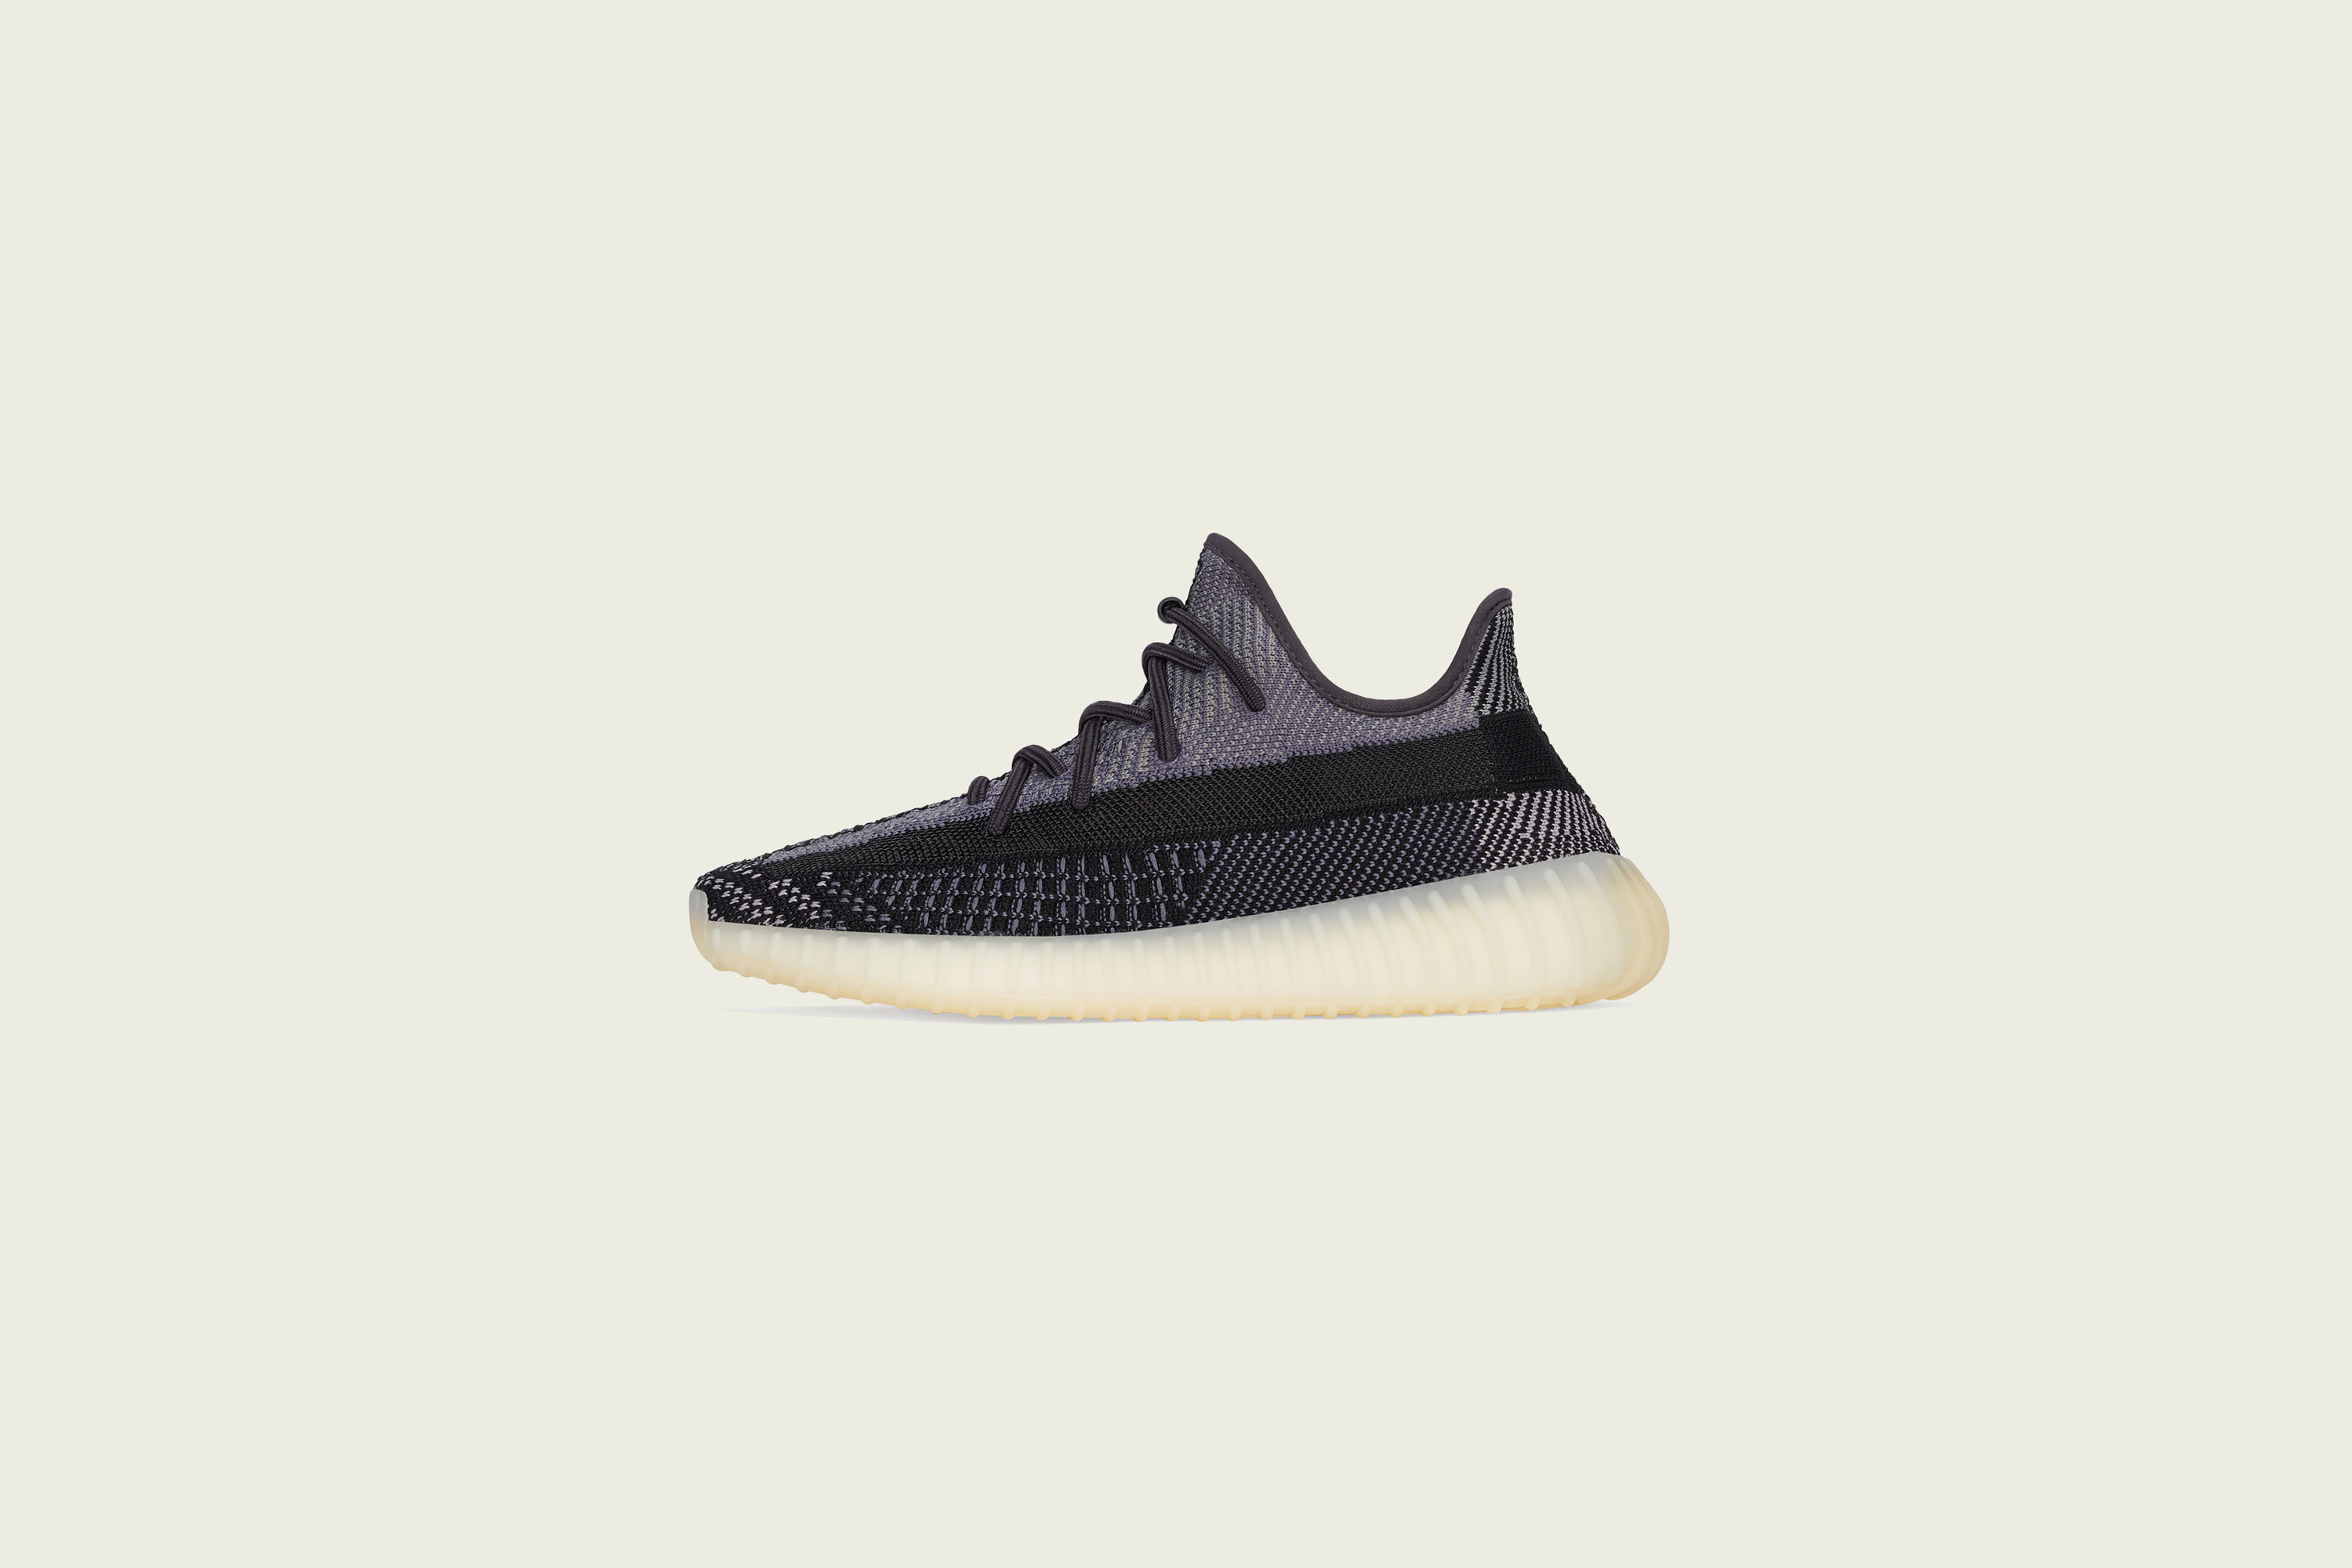 adidas - Yeezy Boost 350v2 - Carbon - Up There